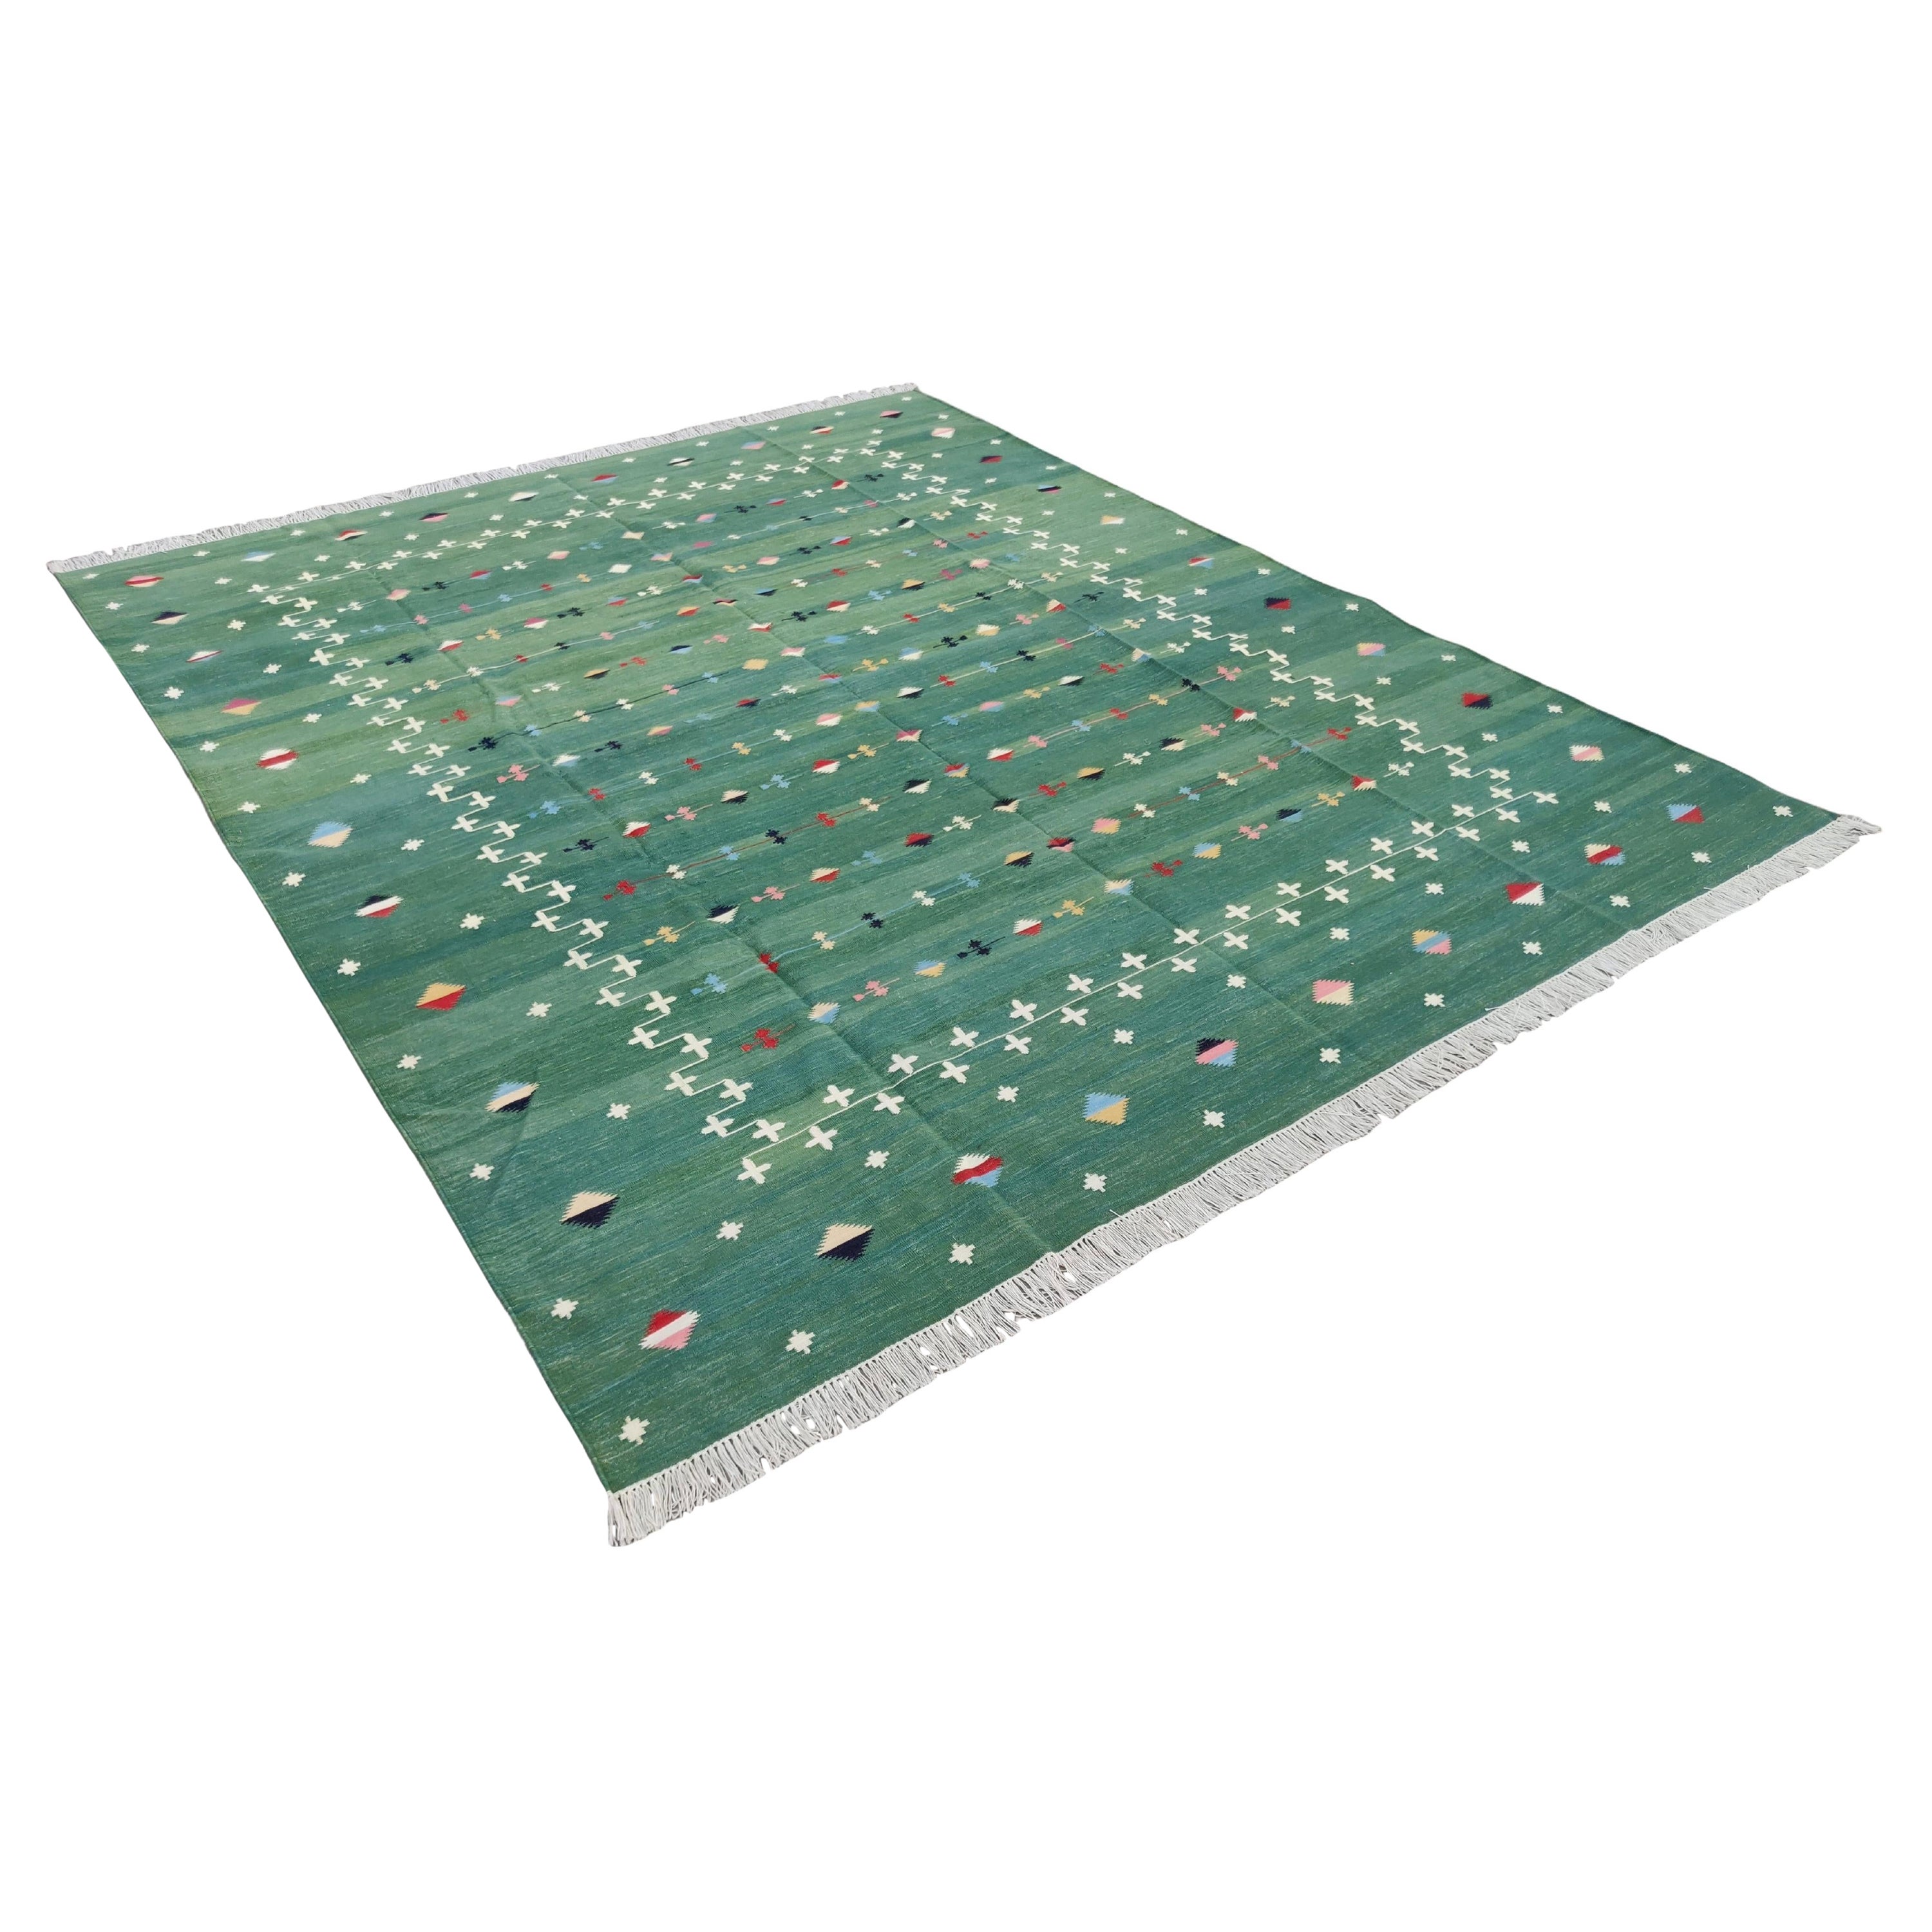 Handmade Cotton Area Flat Weave Rug, Forest Green Indian Shooting Star Dhurrie